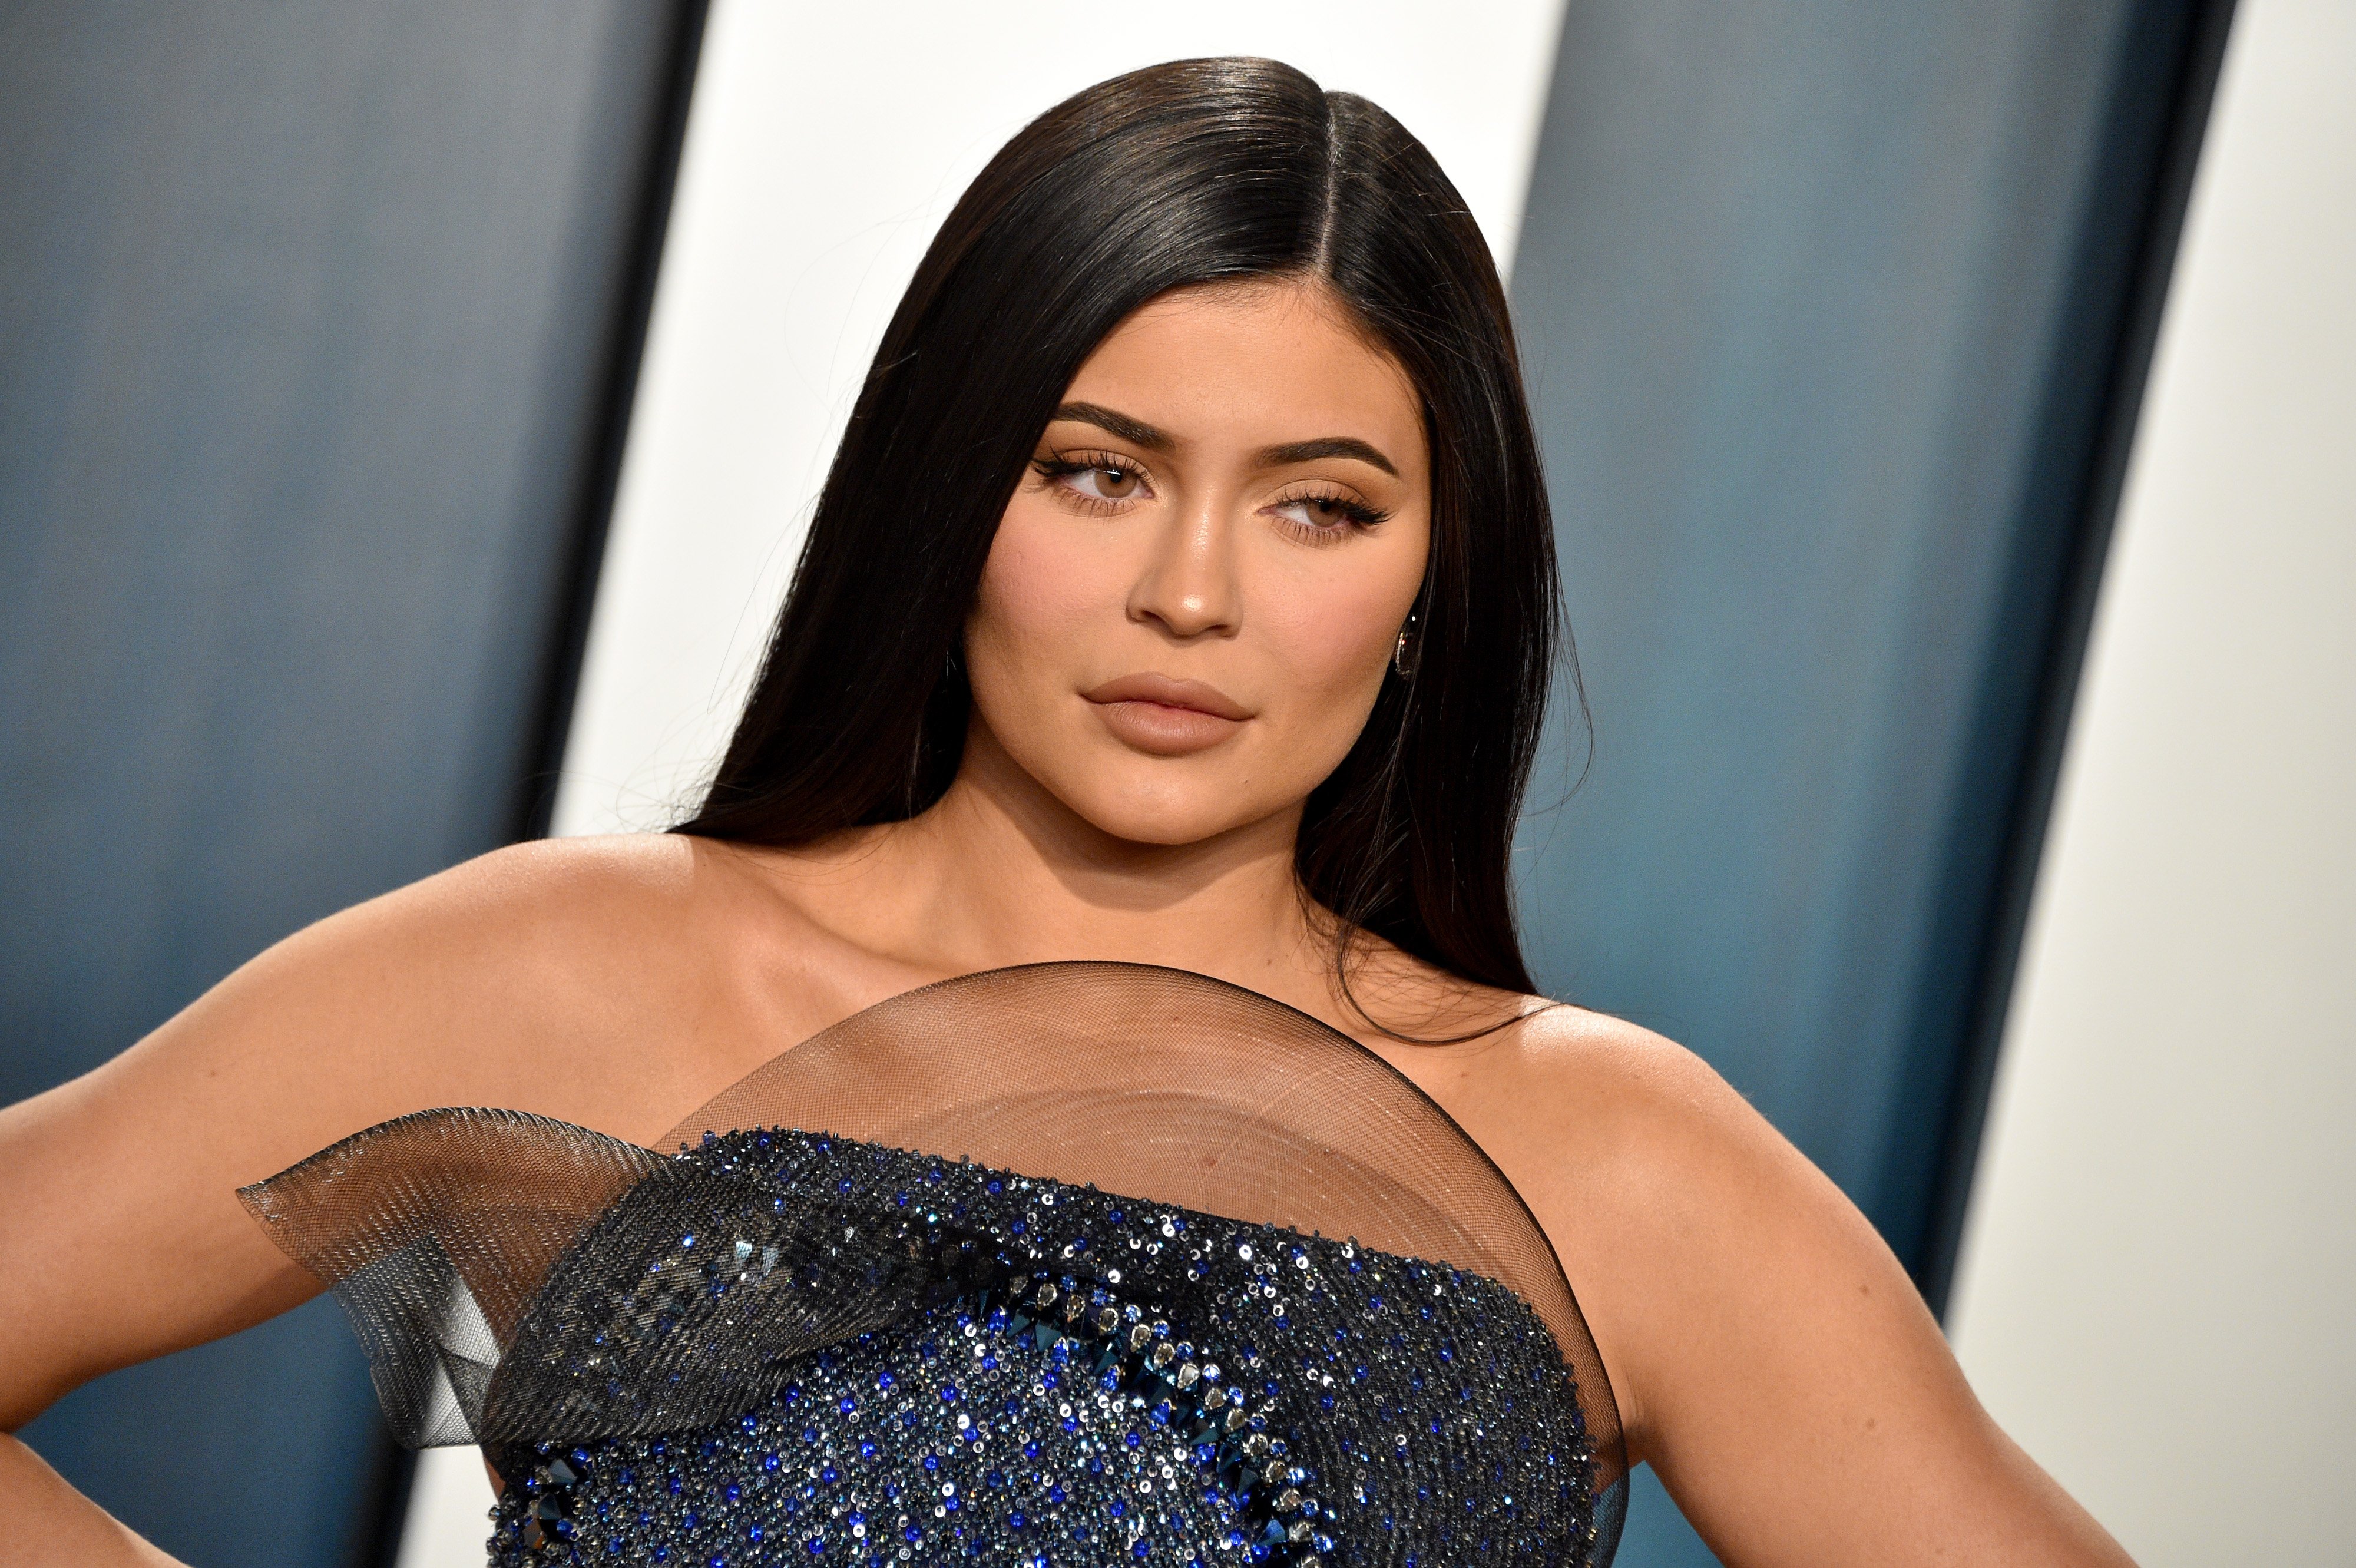 Kylie Jenner poses at the 2020 Vanity Fair Oscar Party at the Wallis Annenberg Center for the Performing Arts on February 09, 2020 in Beverly Hills, California. | Source: Getty Images